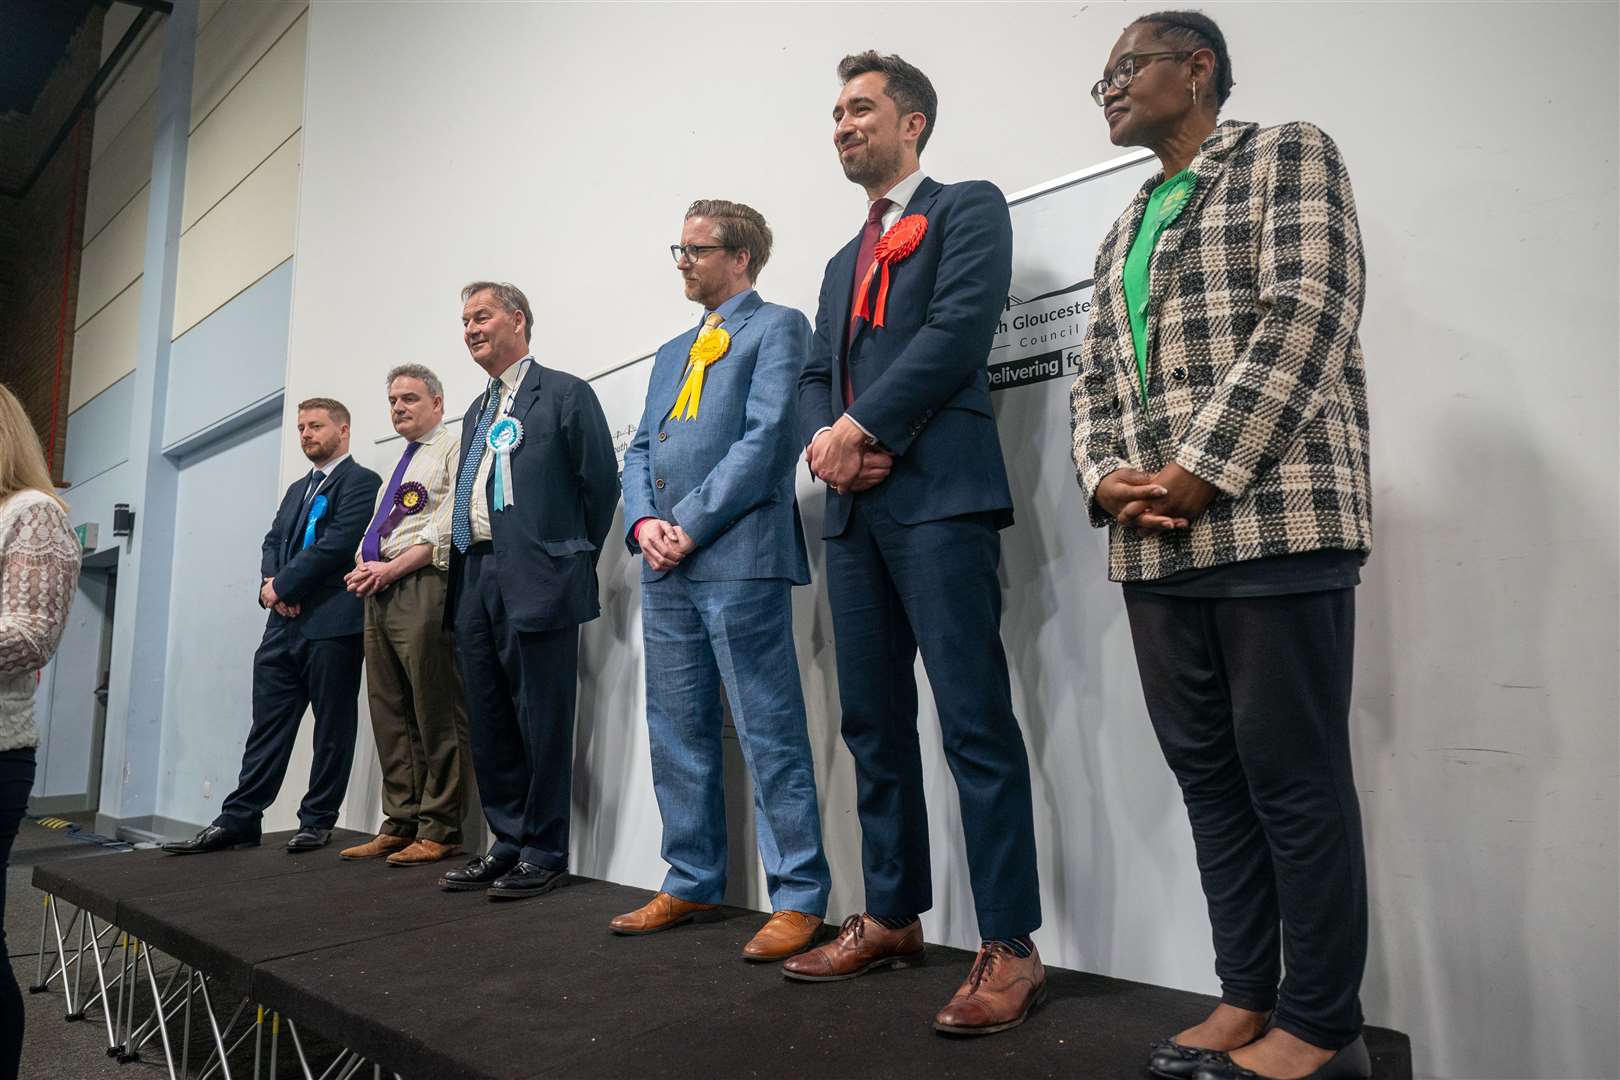 Labour candidate Damien Egan, second right, with fellow candidates at the Thornbury Leisure Centre (Ben Birchall/PA Wire)